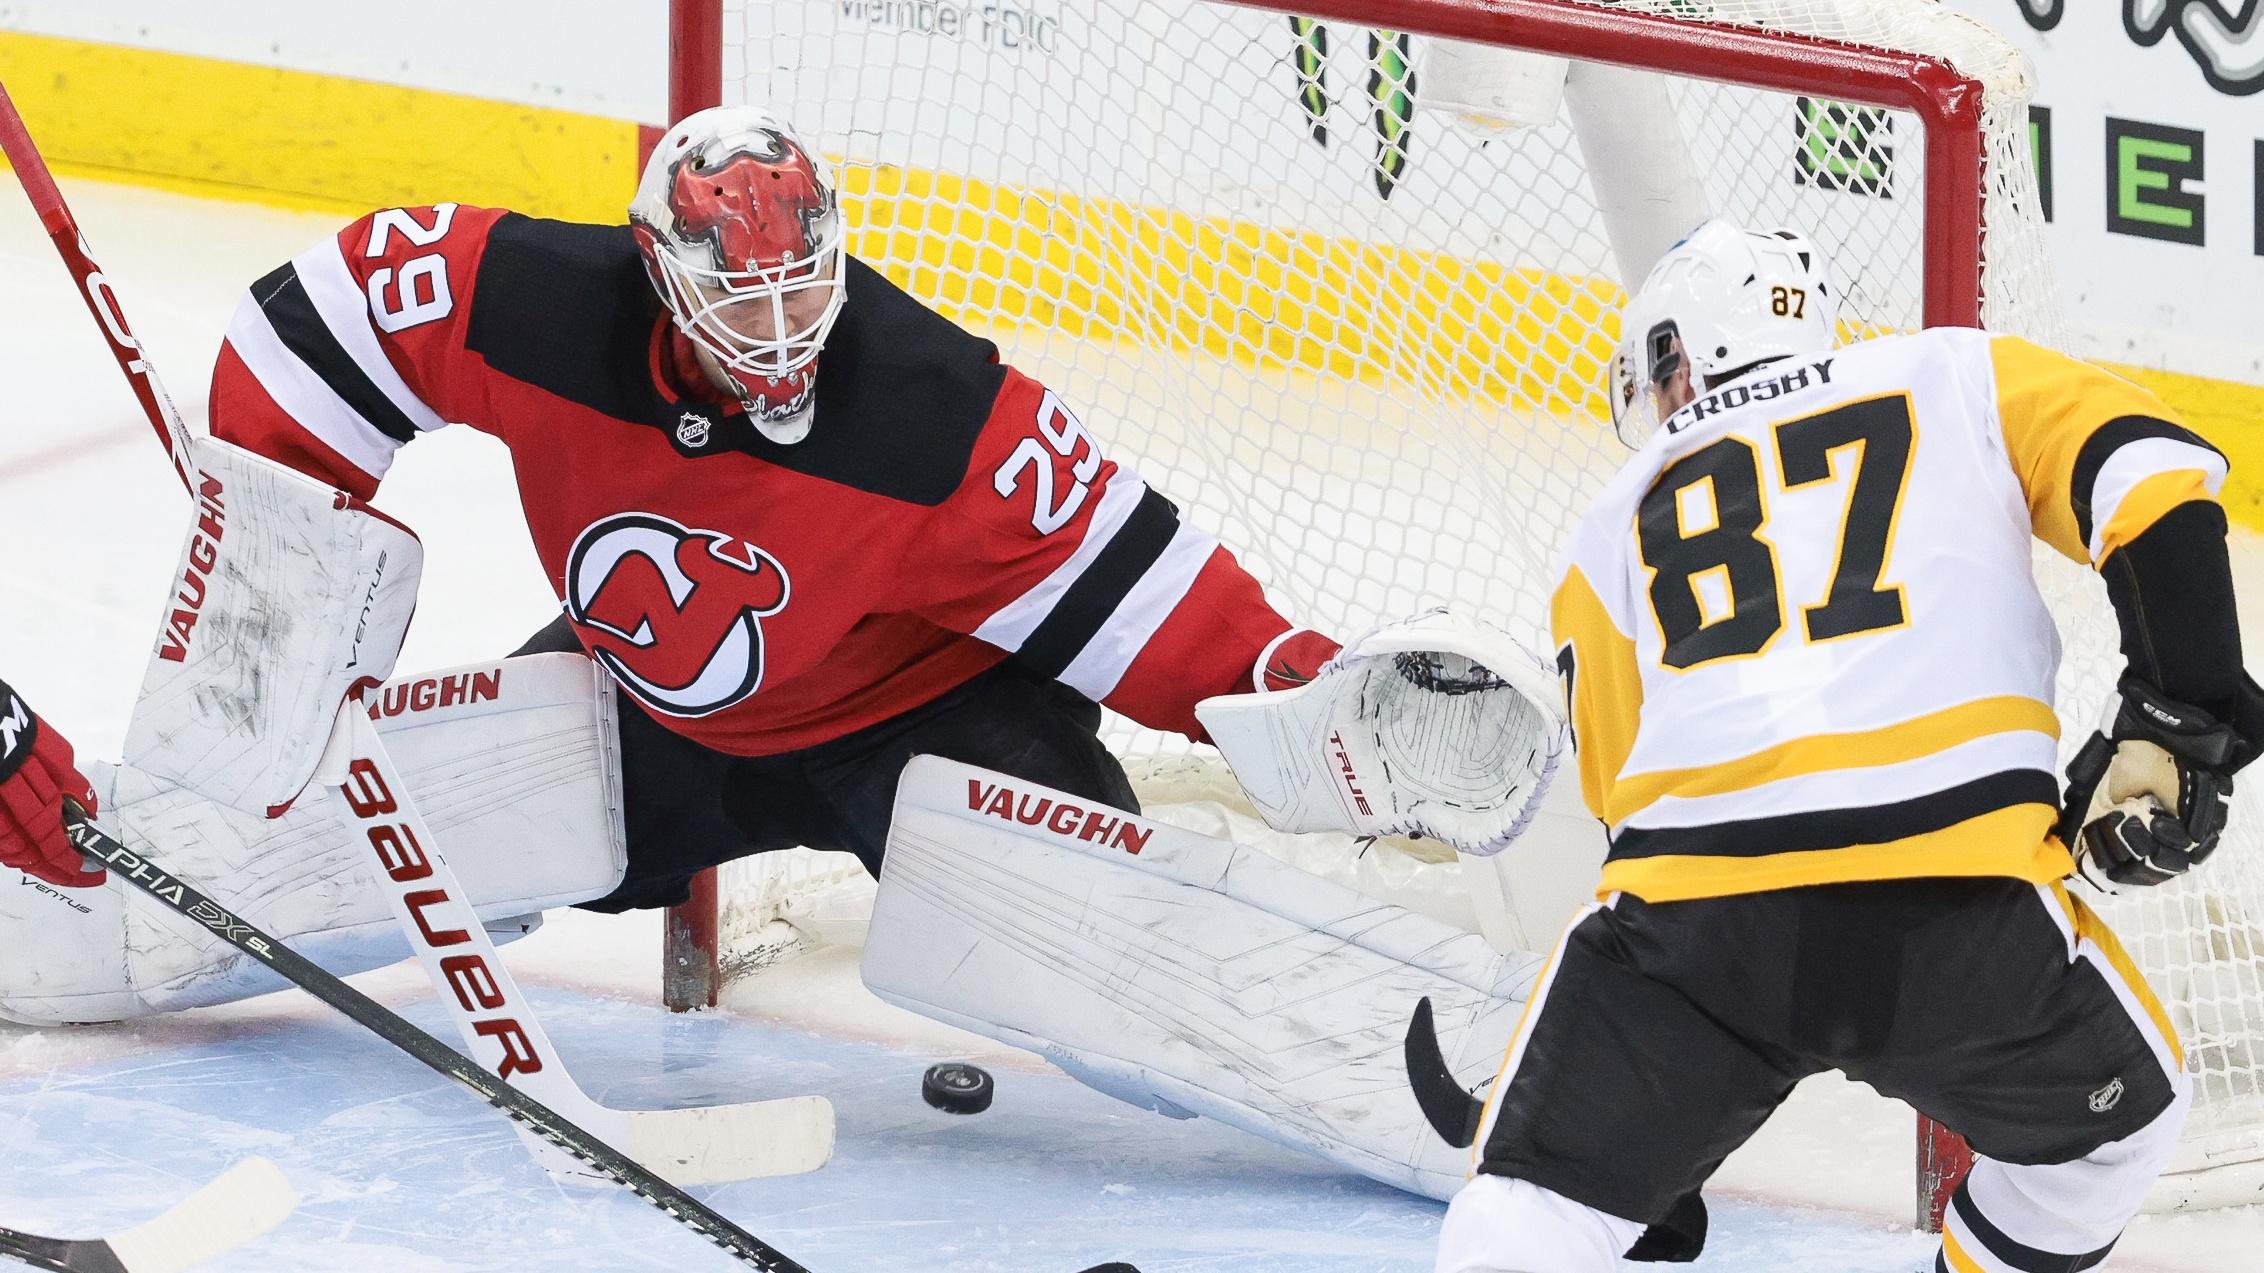 Apr 11, 2021; Newark, New Jersey, USA; New Jersey Devils goaltender Mackenzie Blackwood (29) makes a save on a shot by Pittsburgh Penguins center Sidney Crosby (87) during the third period at Prudential Center. / © Vincent Carchietta-USA TODAY Sports